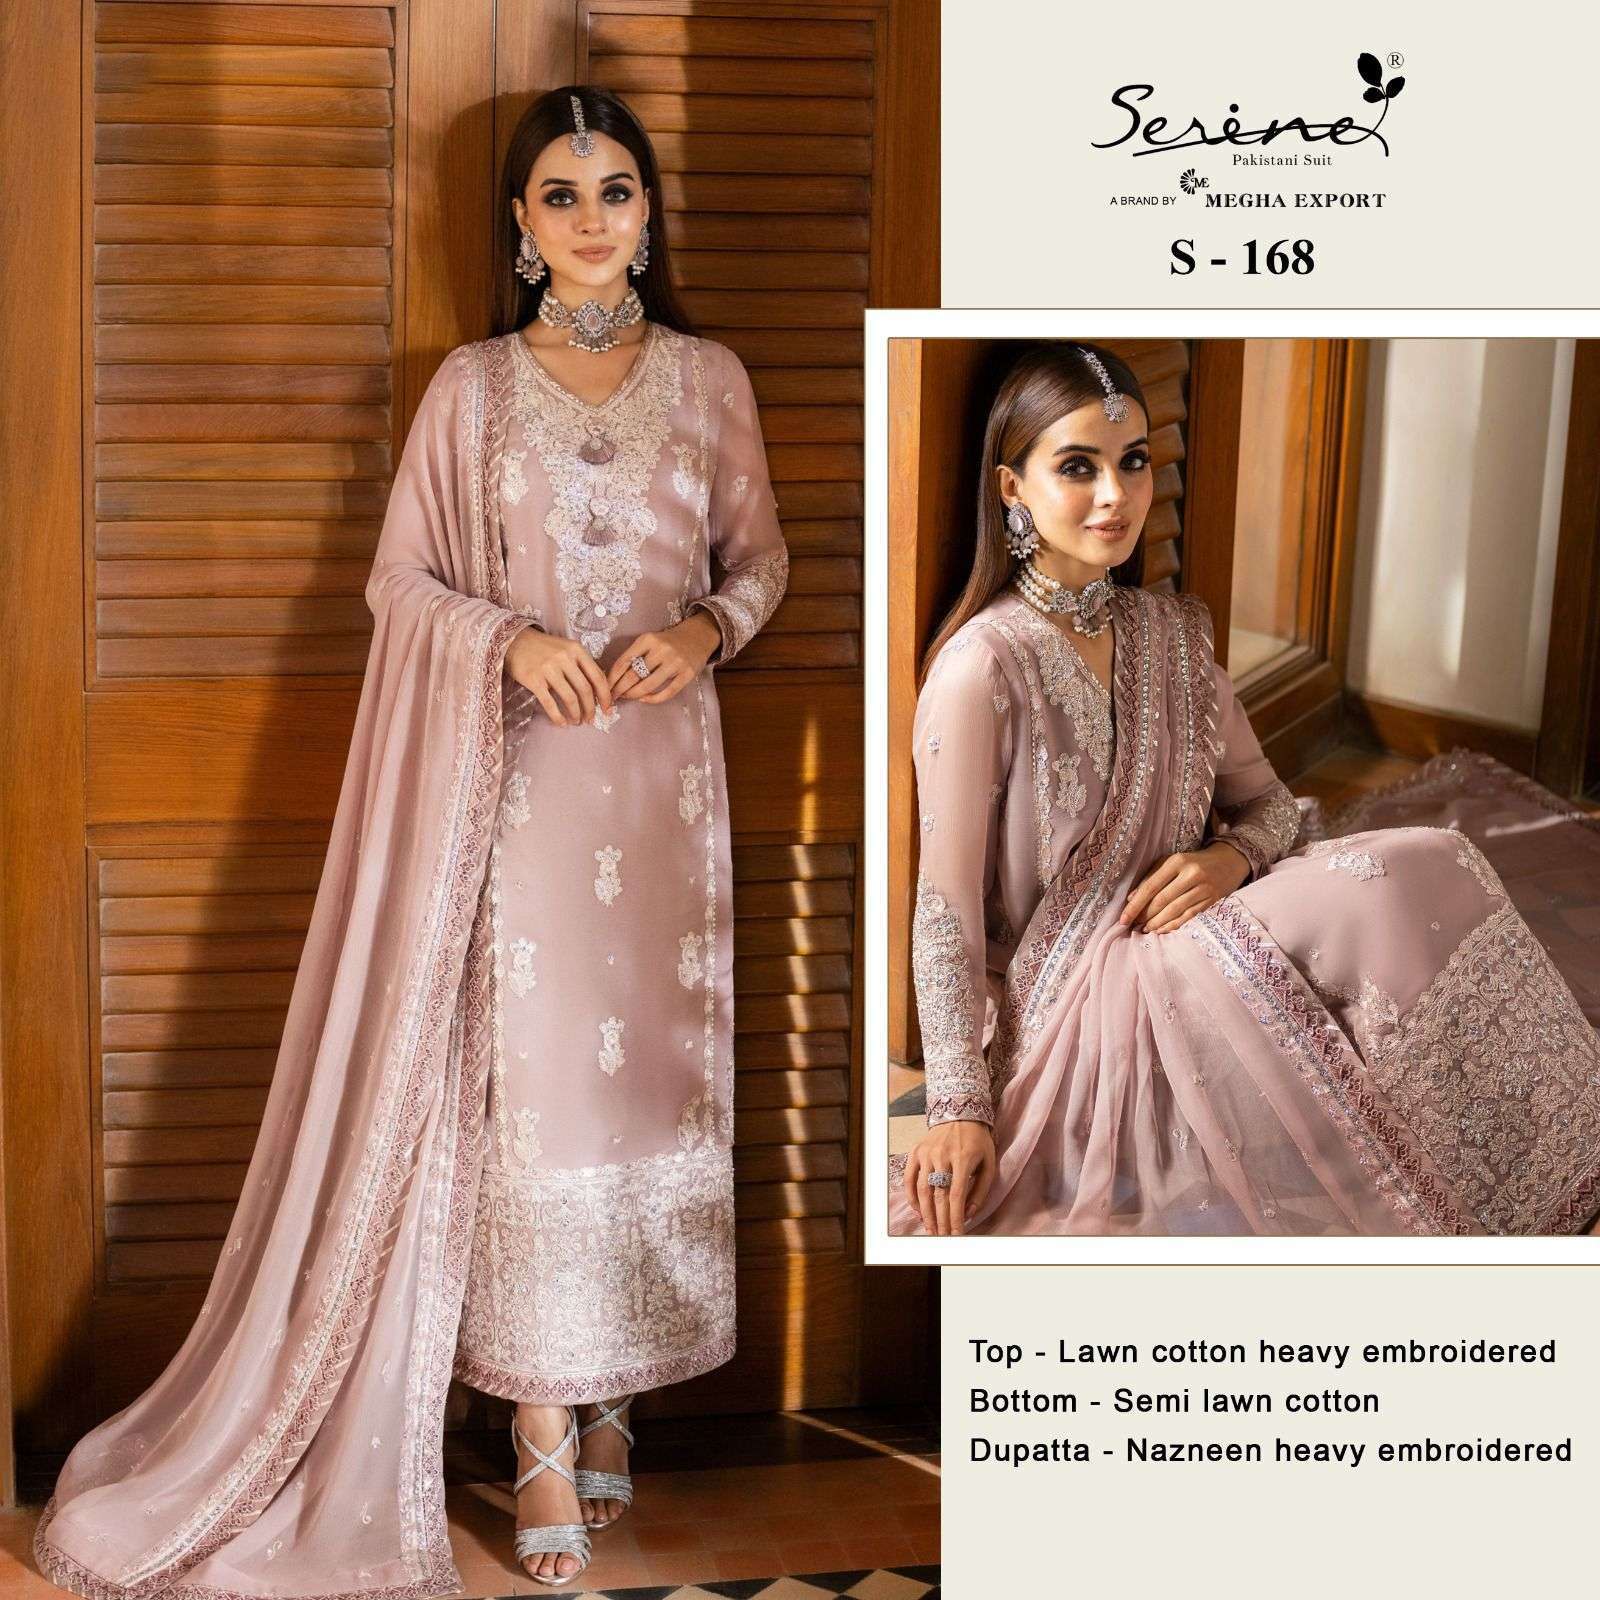 serine 168 lawn cotton heavy embroidery suit